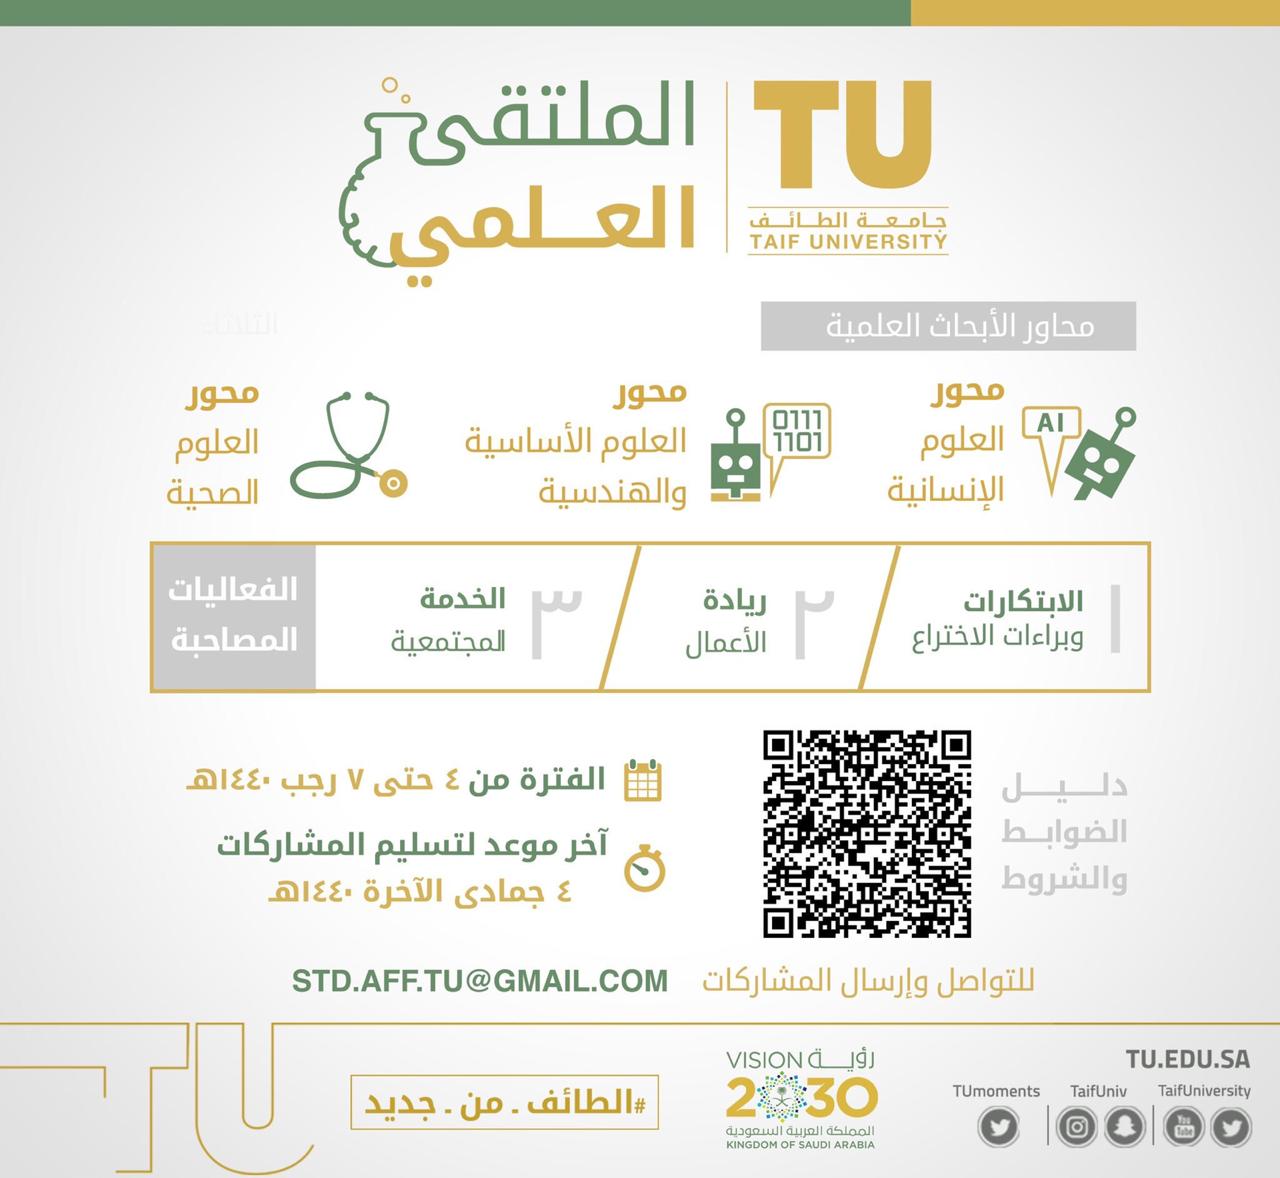 Scientific forum for Taif University students